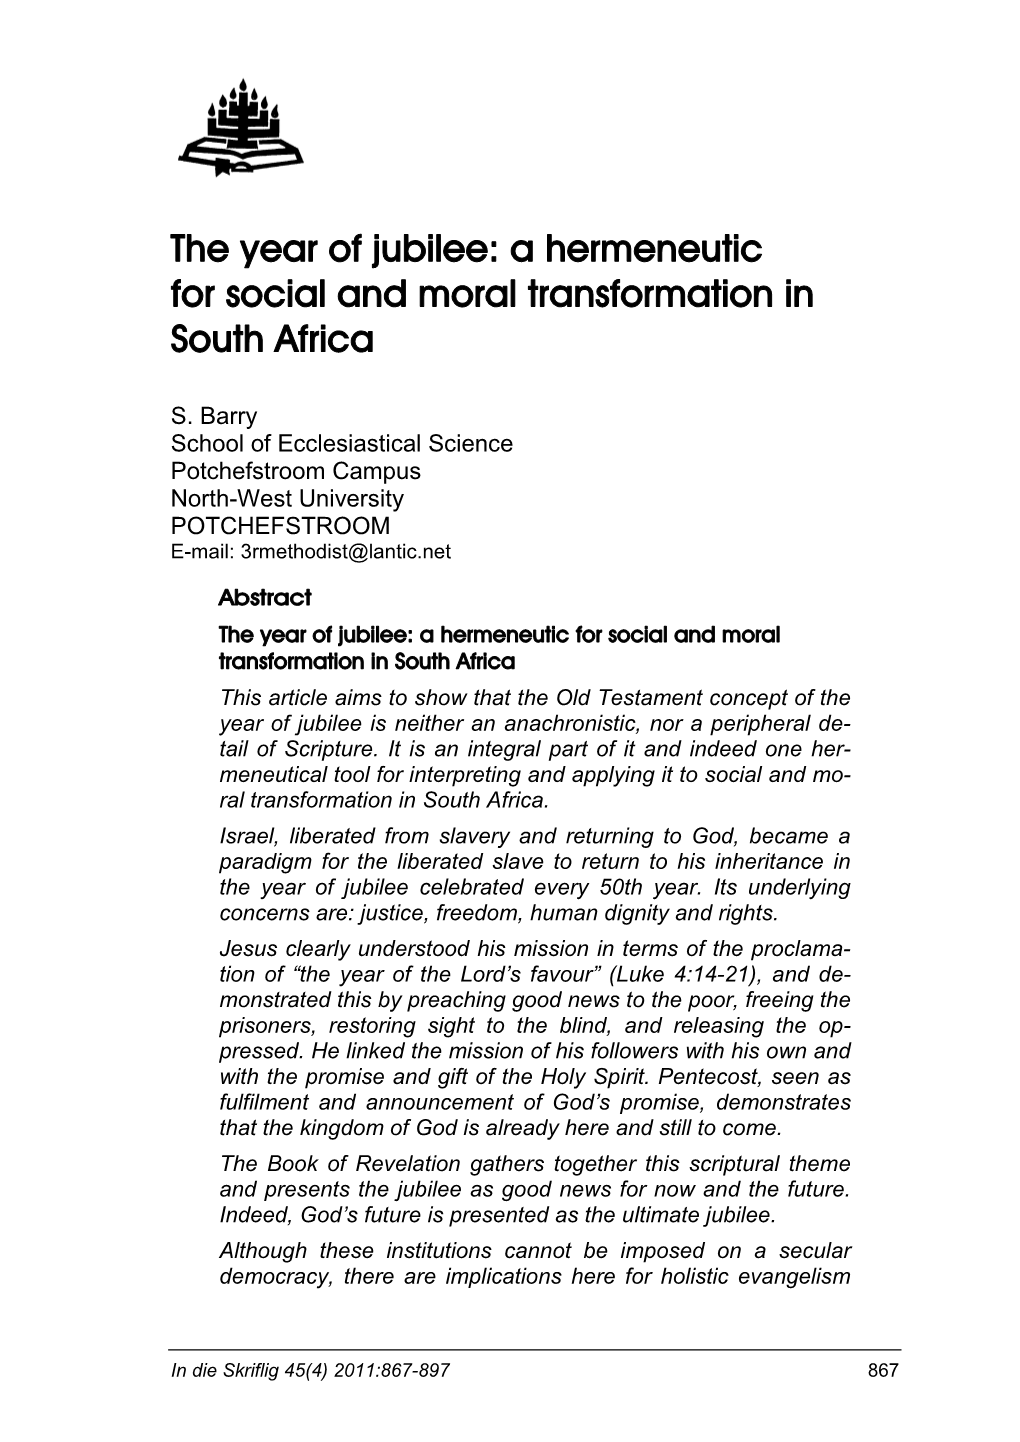 The Year of Jubilee: a Hermeneutic for Social and Moral Transformation in South Africa